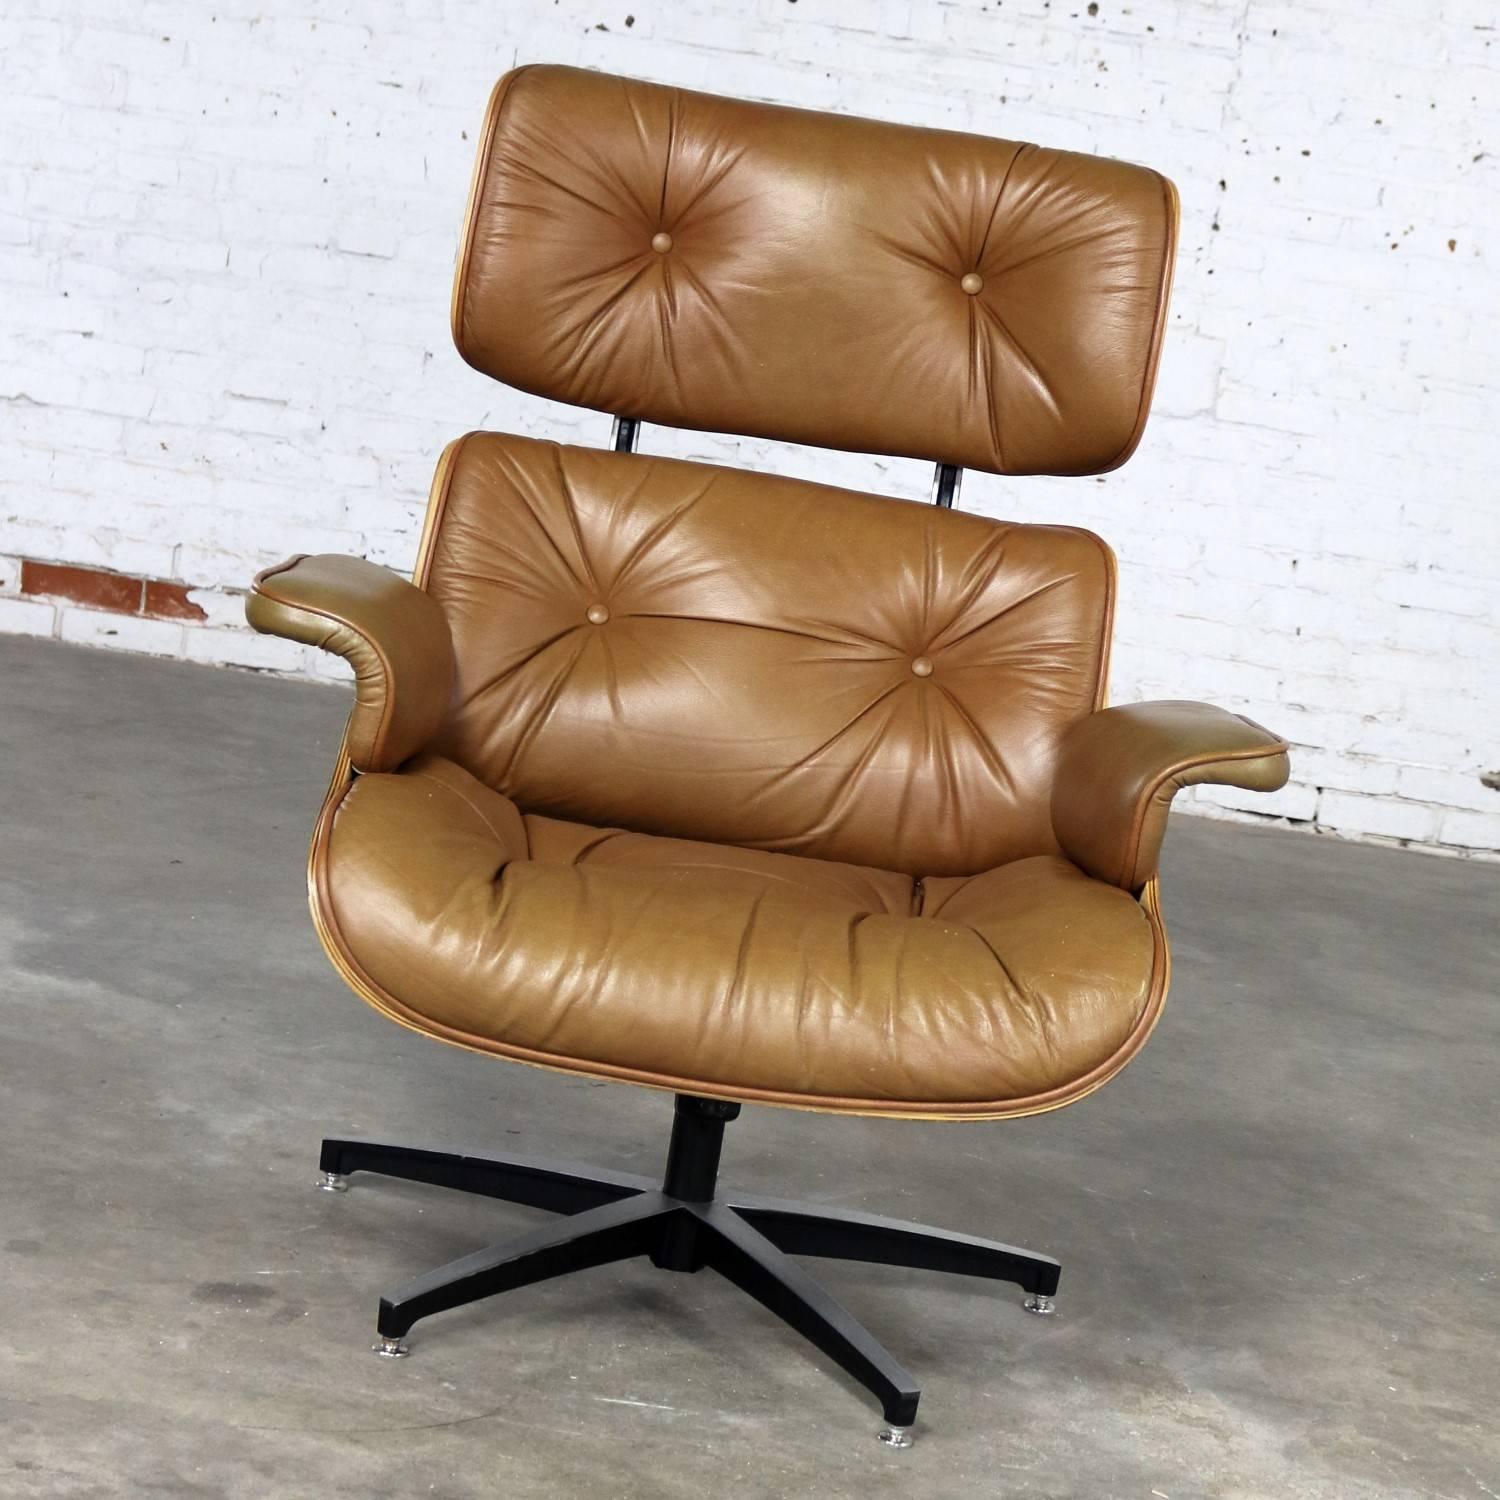 This Eames-style, Naugahyde or leather-upholstered molded walnut lounge chair hails from the 1960s and is a classic reproduction of the iconic Eames lounge chair. Attributed to Selig Plycraft, this mid-century chair has gained a cult following, in